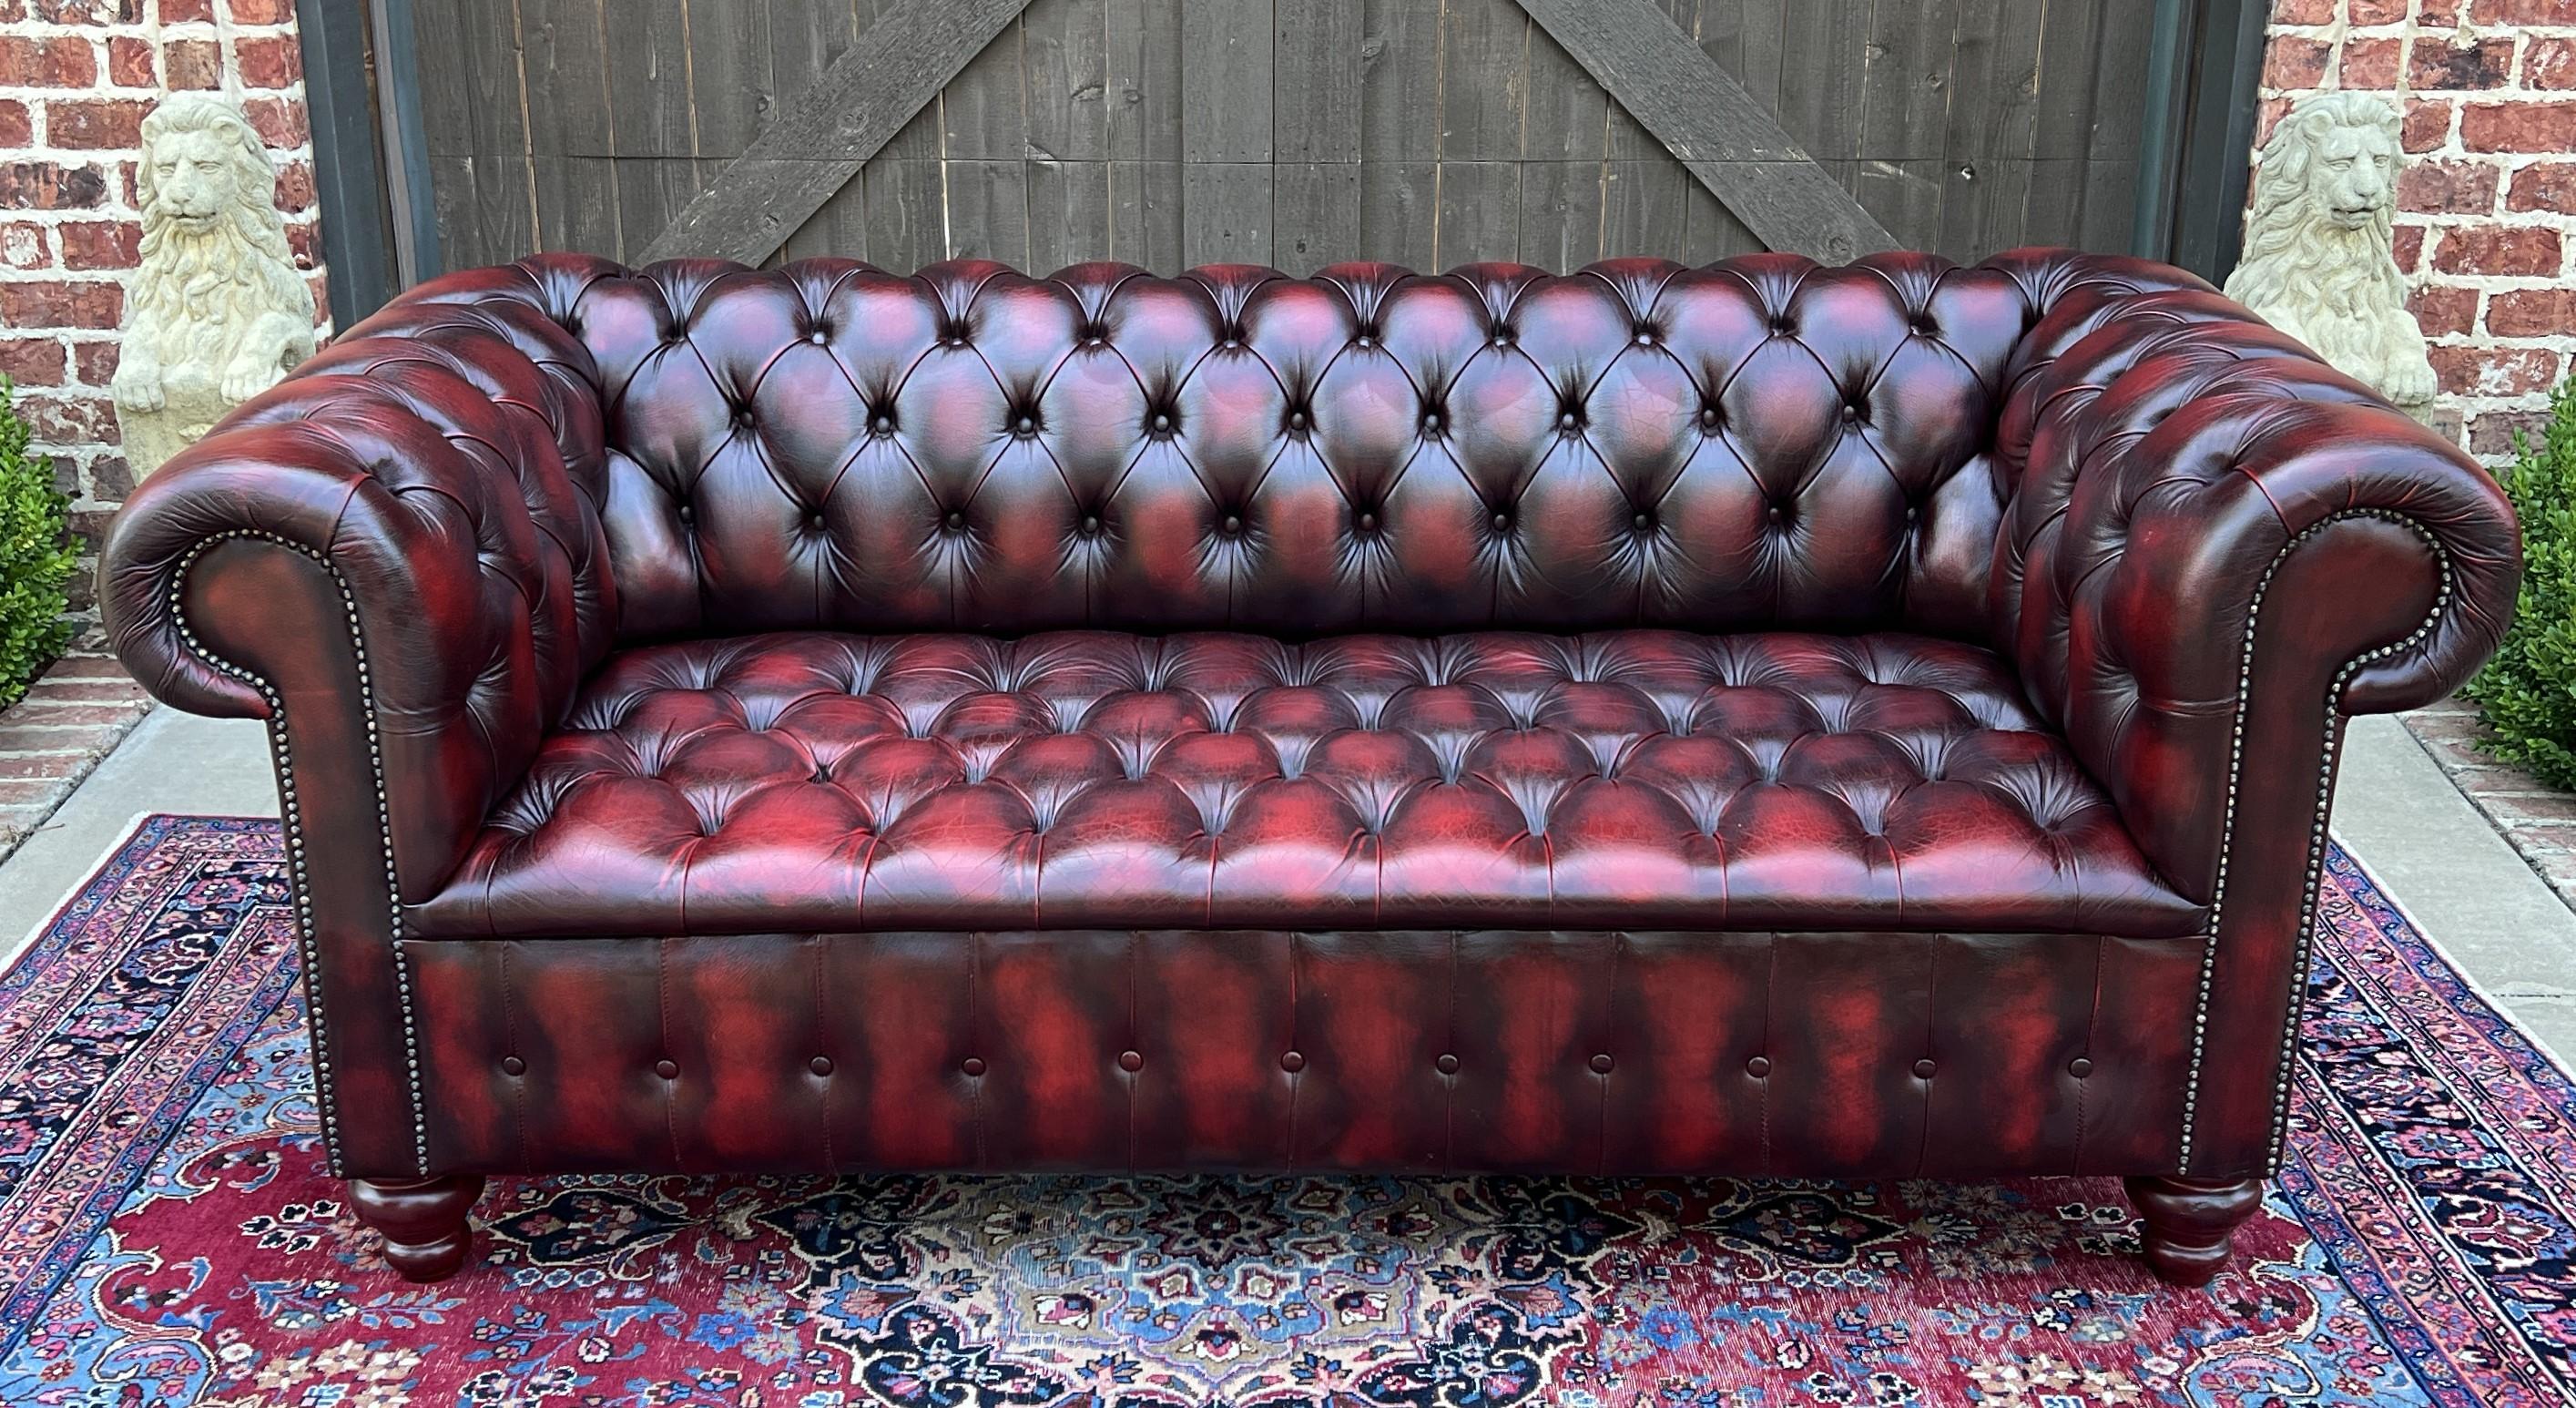 Vintage English Chesterfield Leather Sofa Tufted Seat Oxblood Red Mid-Century #2 2